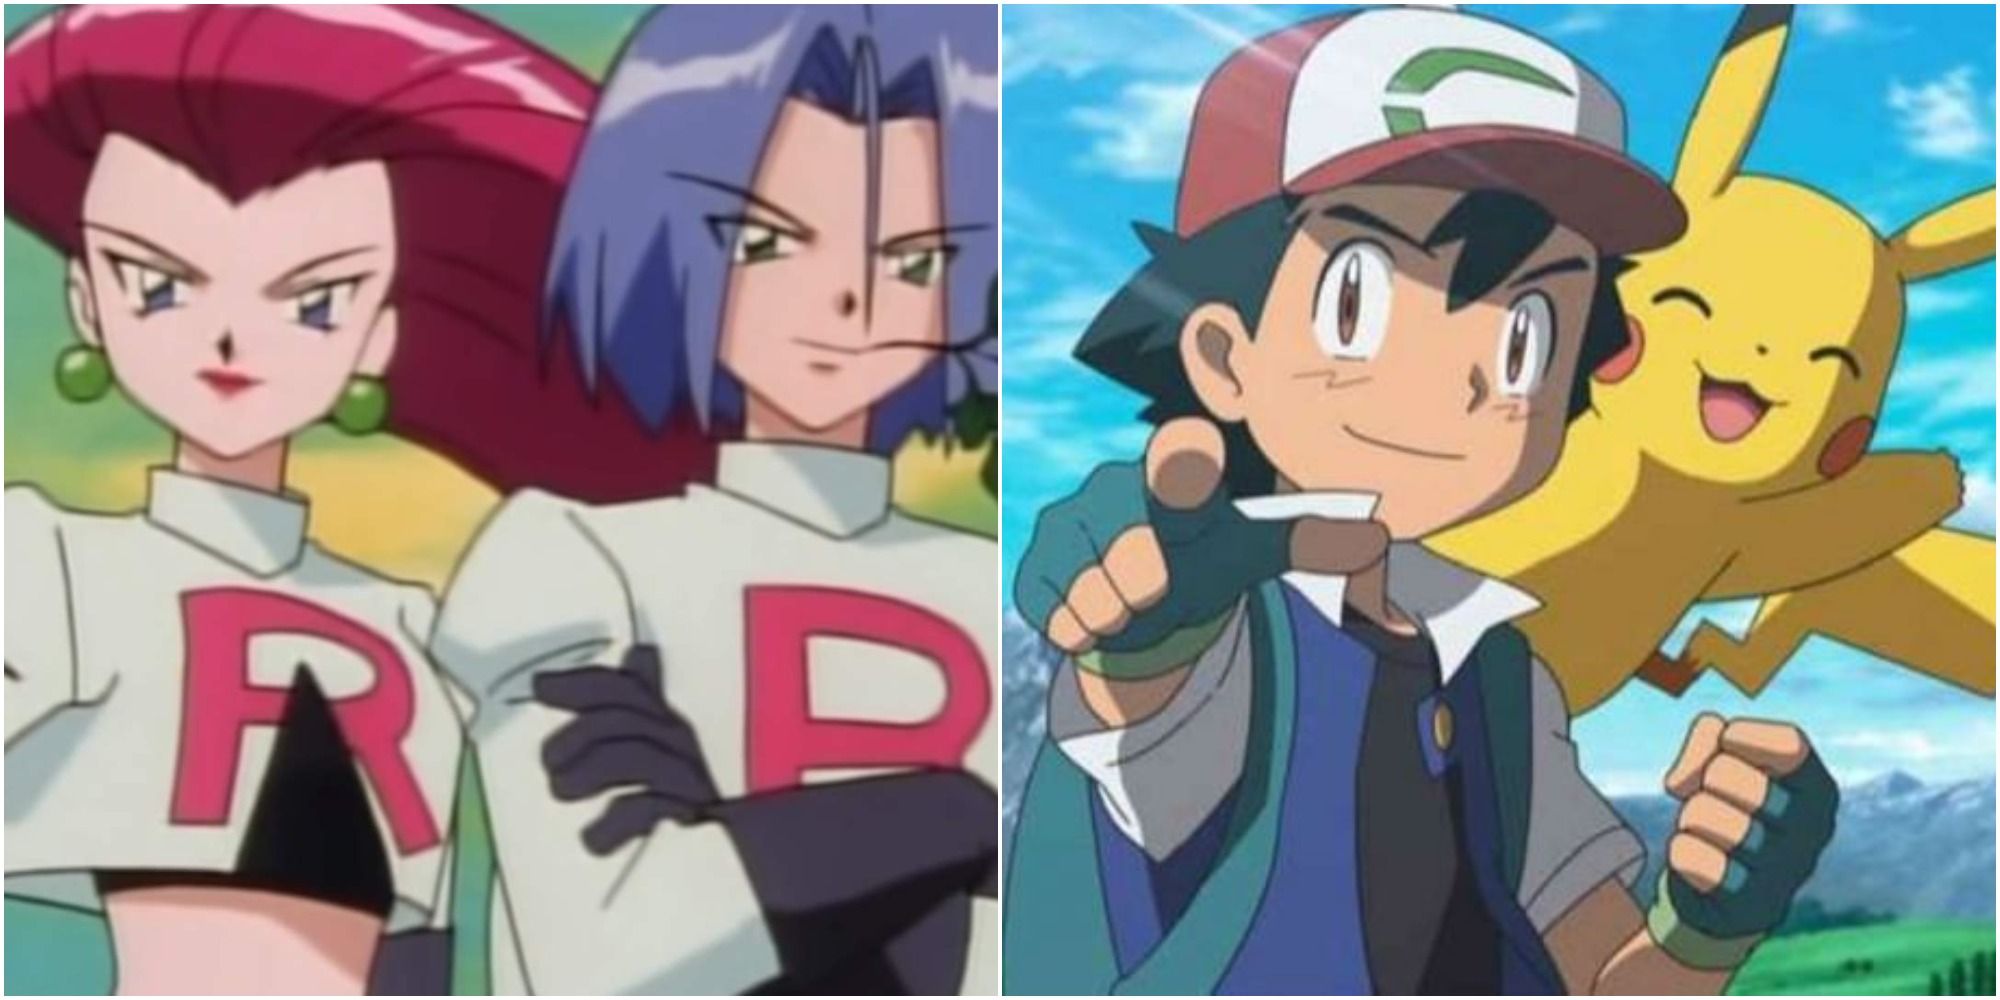 Pokémon: 10 Things About The Anime That Annoyed Fans Of The Games